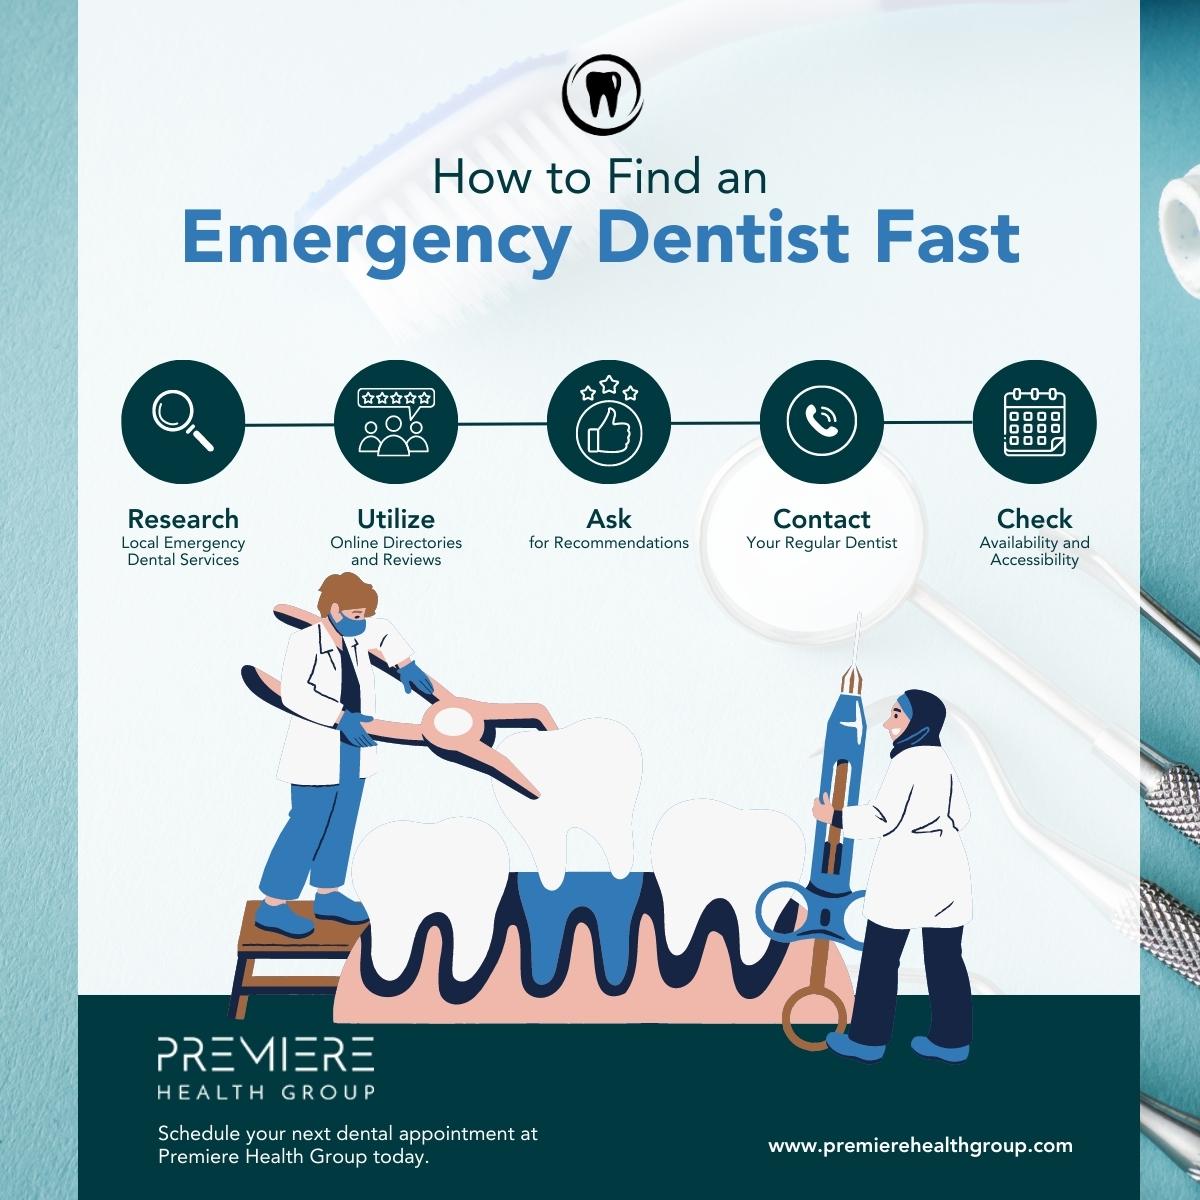 How to Find an Emergency Dentist Fast 2